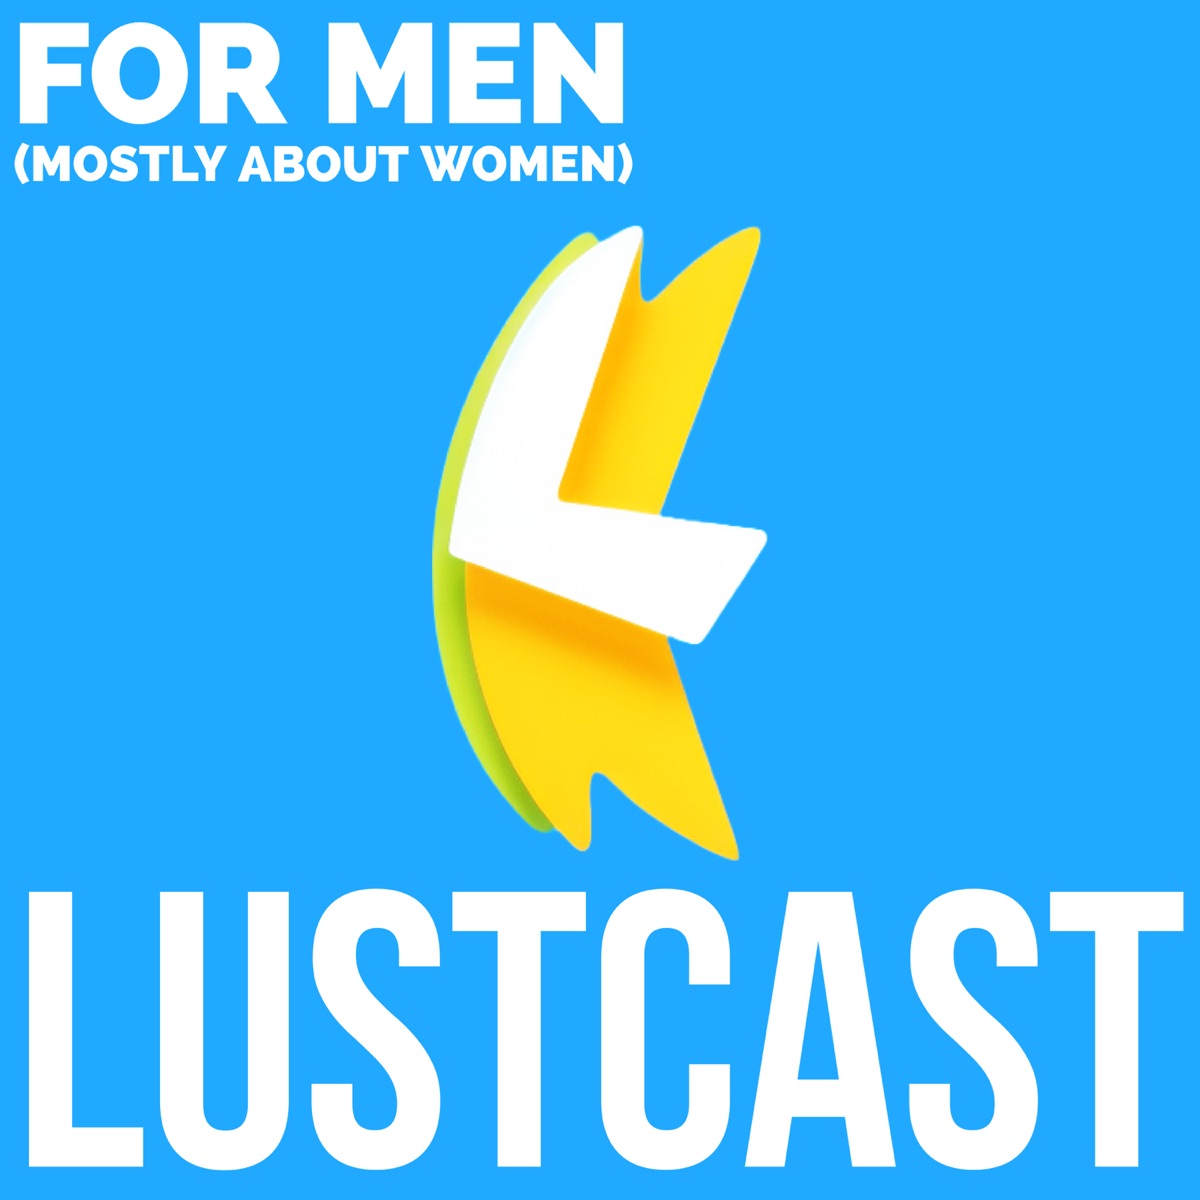 LustCast – Podcast picture